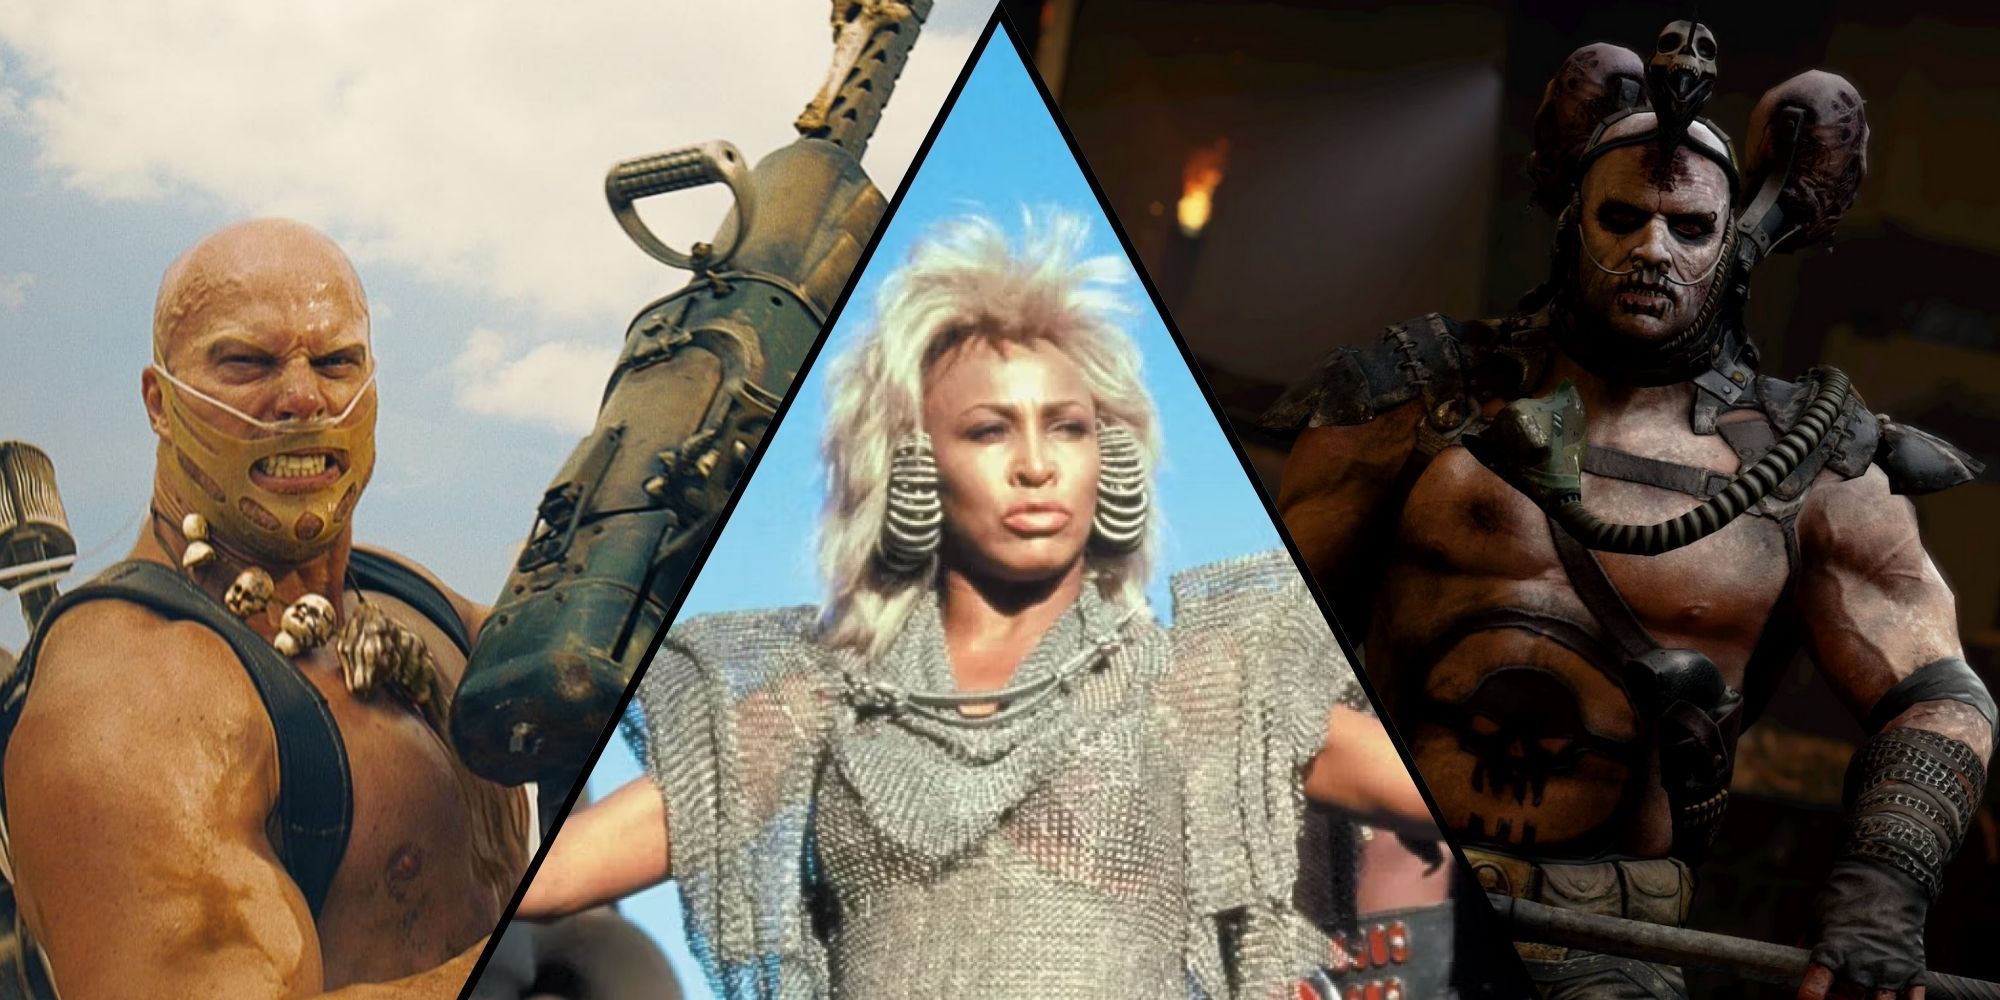 Rictus (Mad Max: Fury Road), Aunt Entity (Beyond Thunderdome), and Scrotus (Mad Max game)